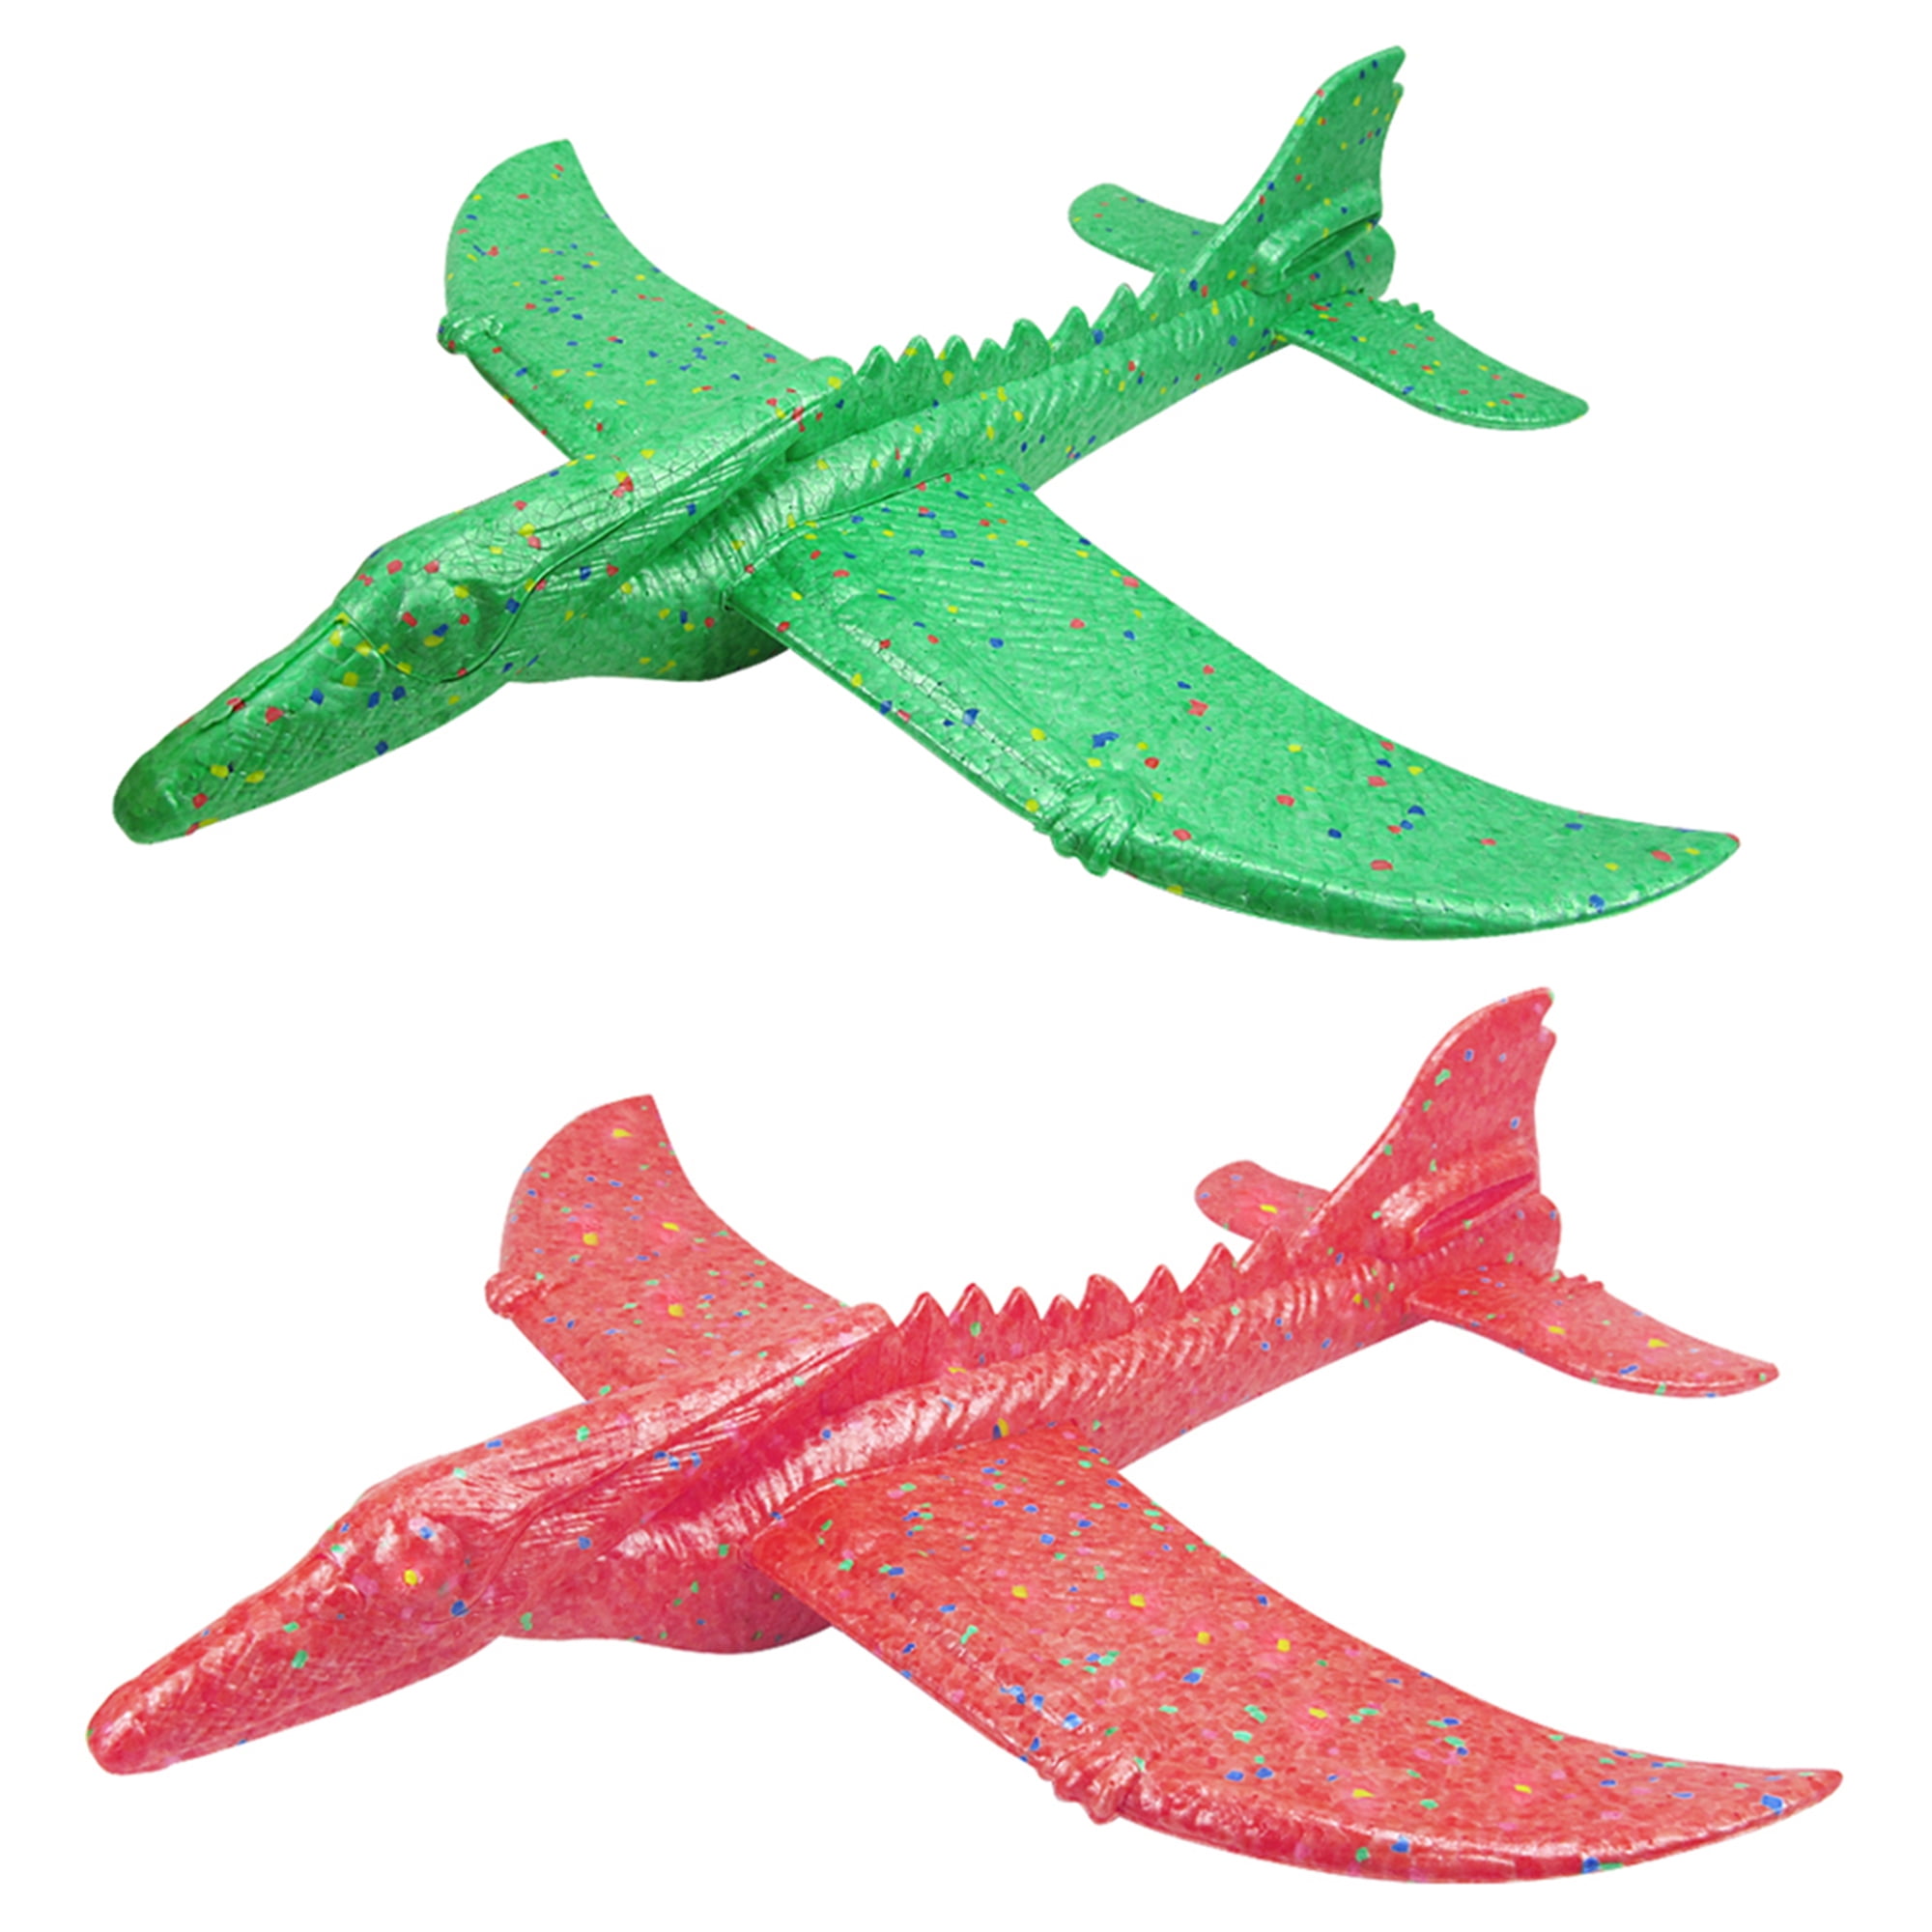 2x Sets Paper Foam Shooting Plastic Planes Airplanes Toy DIY Kids Boys Party 